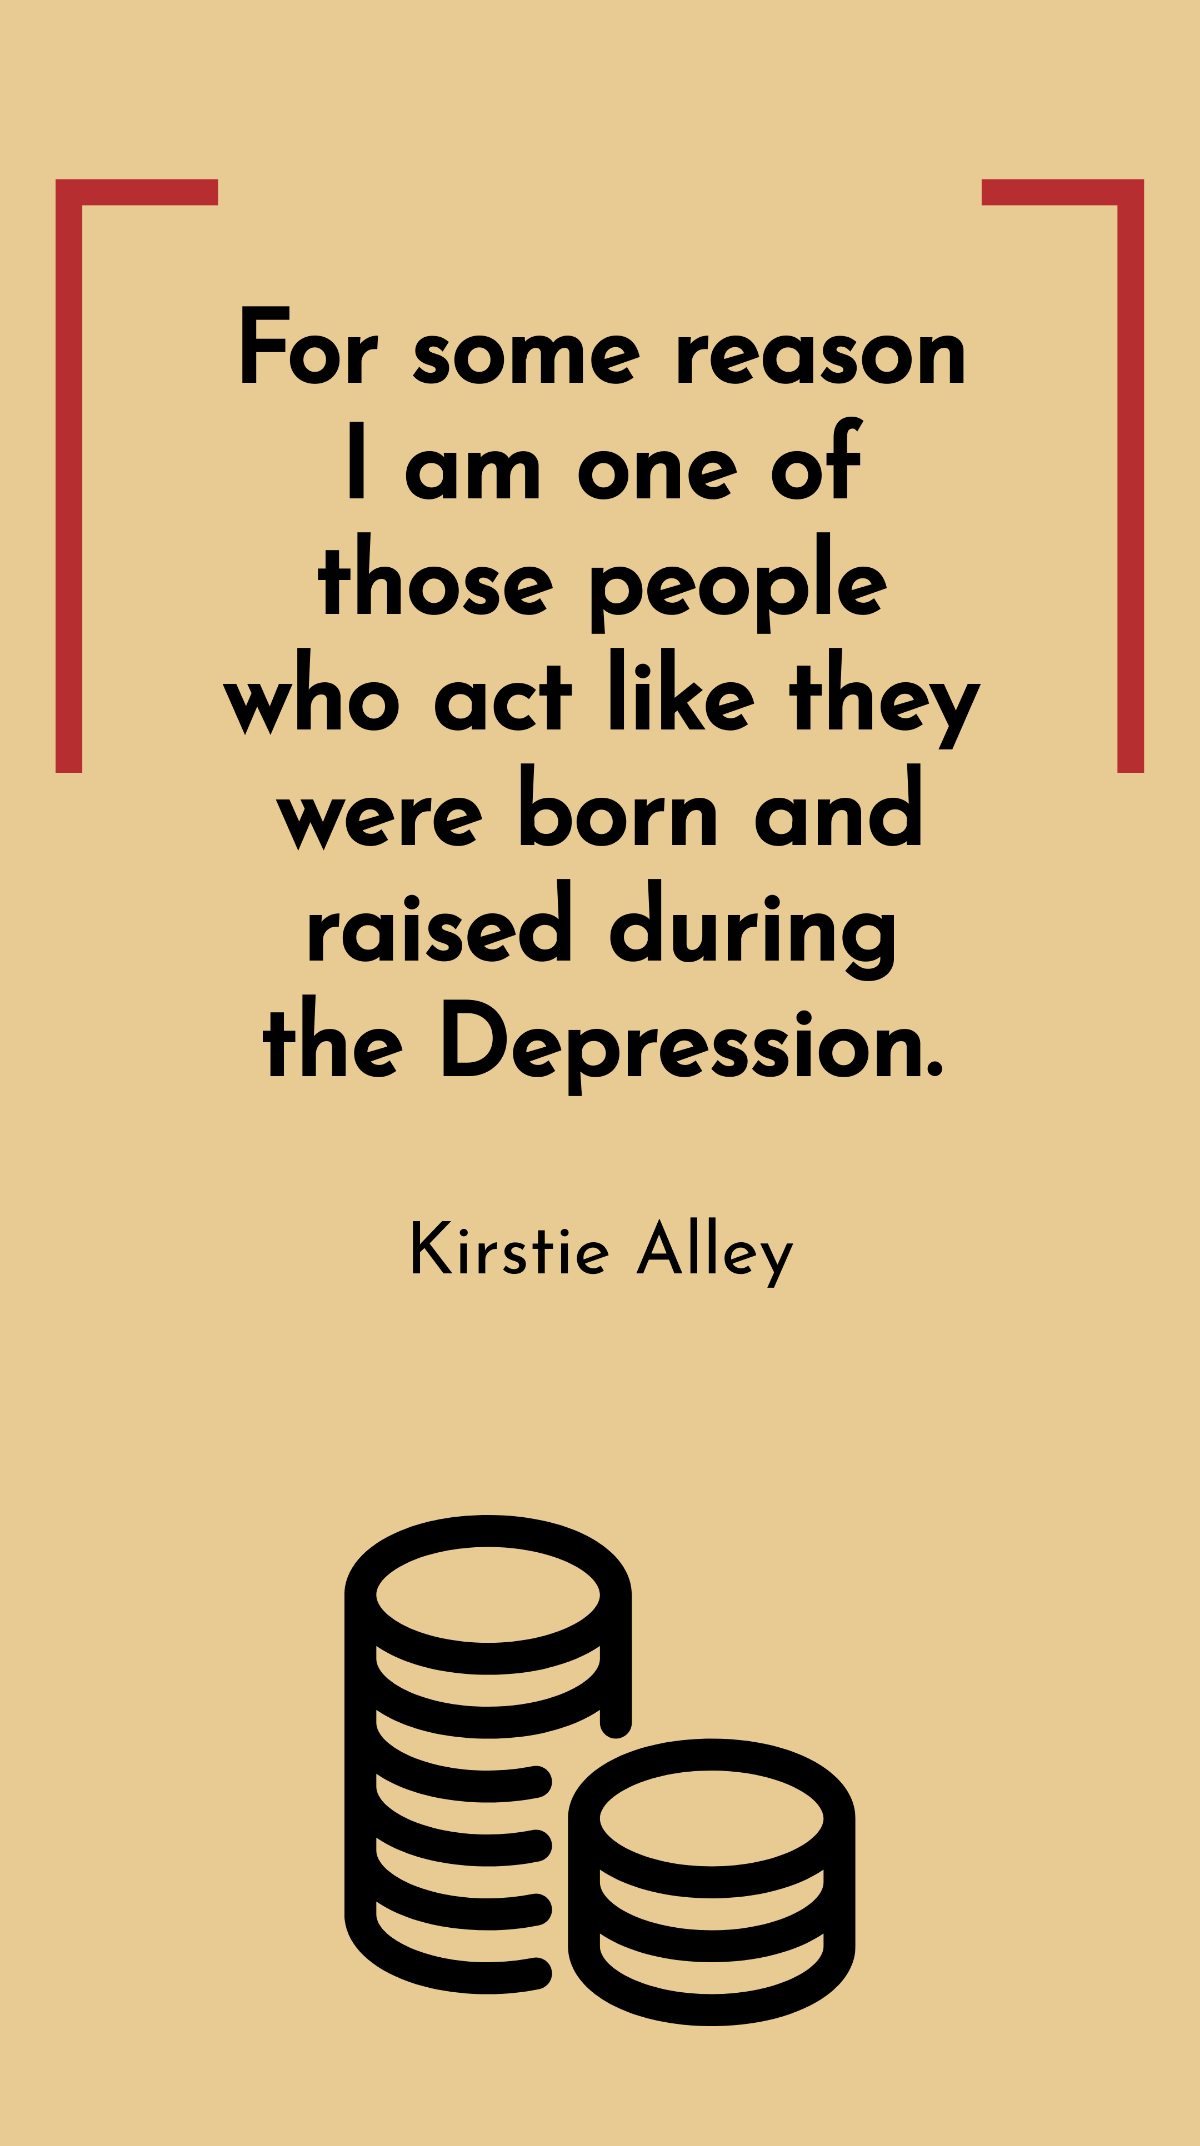 Kirstie Alley - For some reason I am one of those people who act like they were born and raised during the Depression. Template